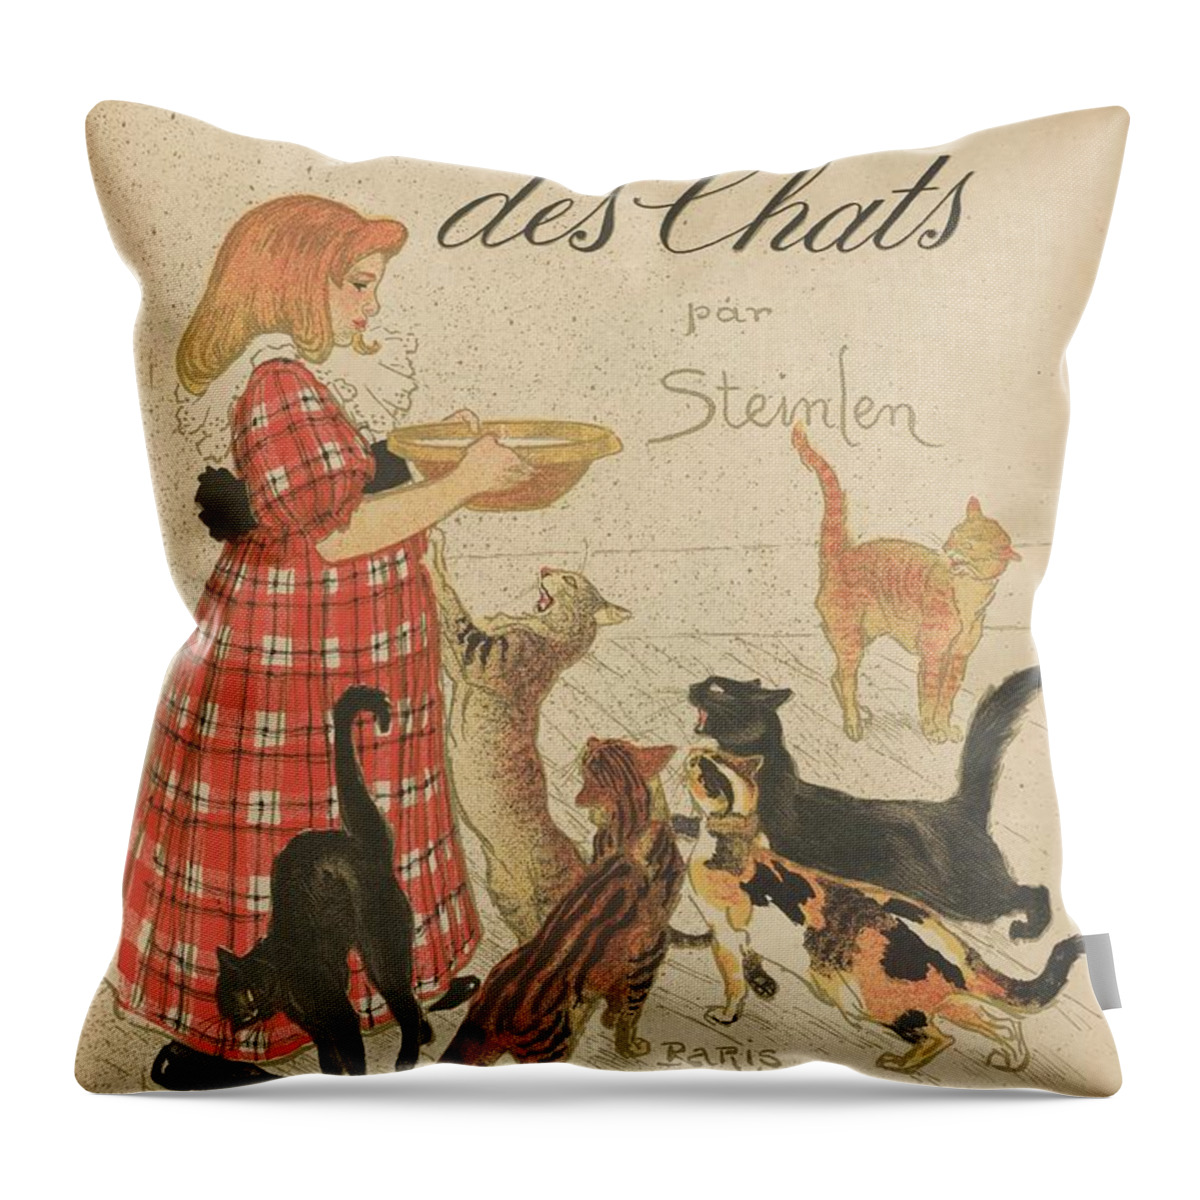 Artists' Book Des Chats Throw Pillow featuring the painting Dessins Sans Paroles by MotionAge Designs